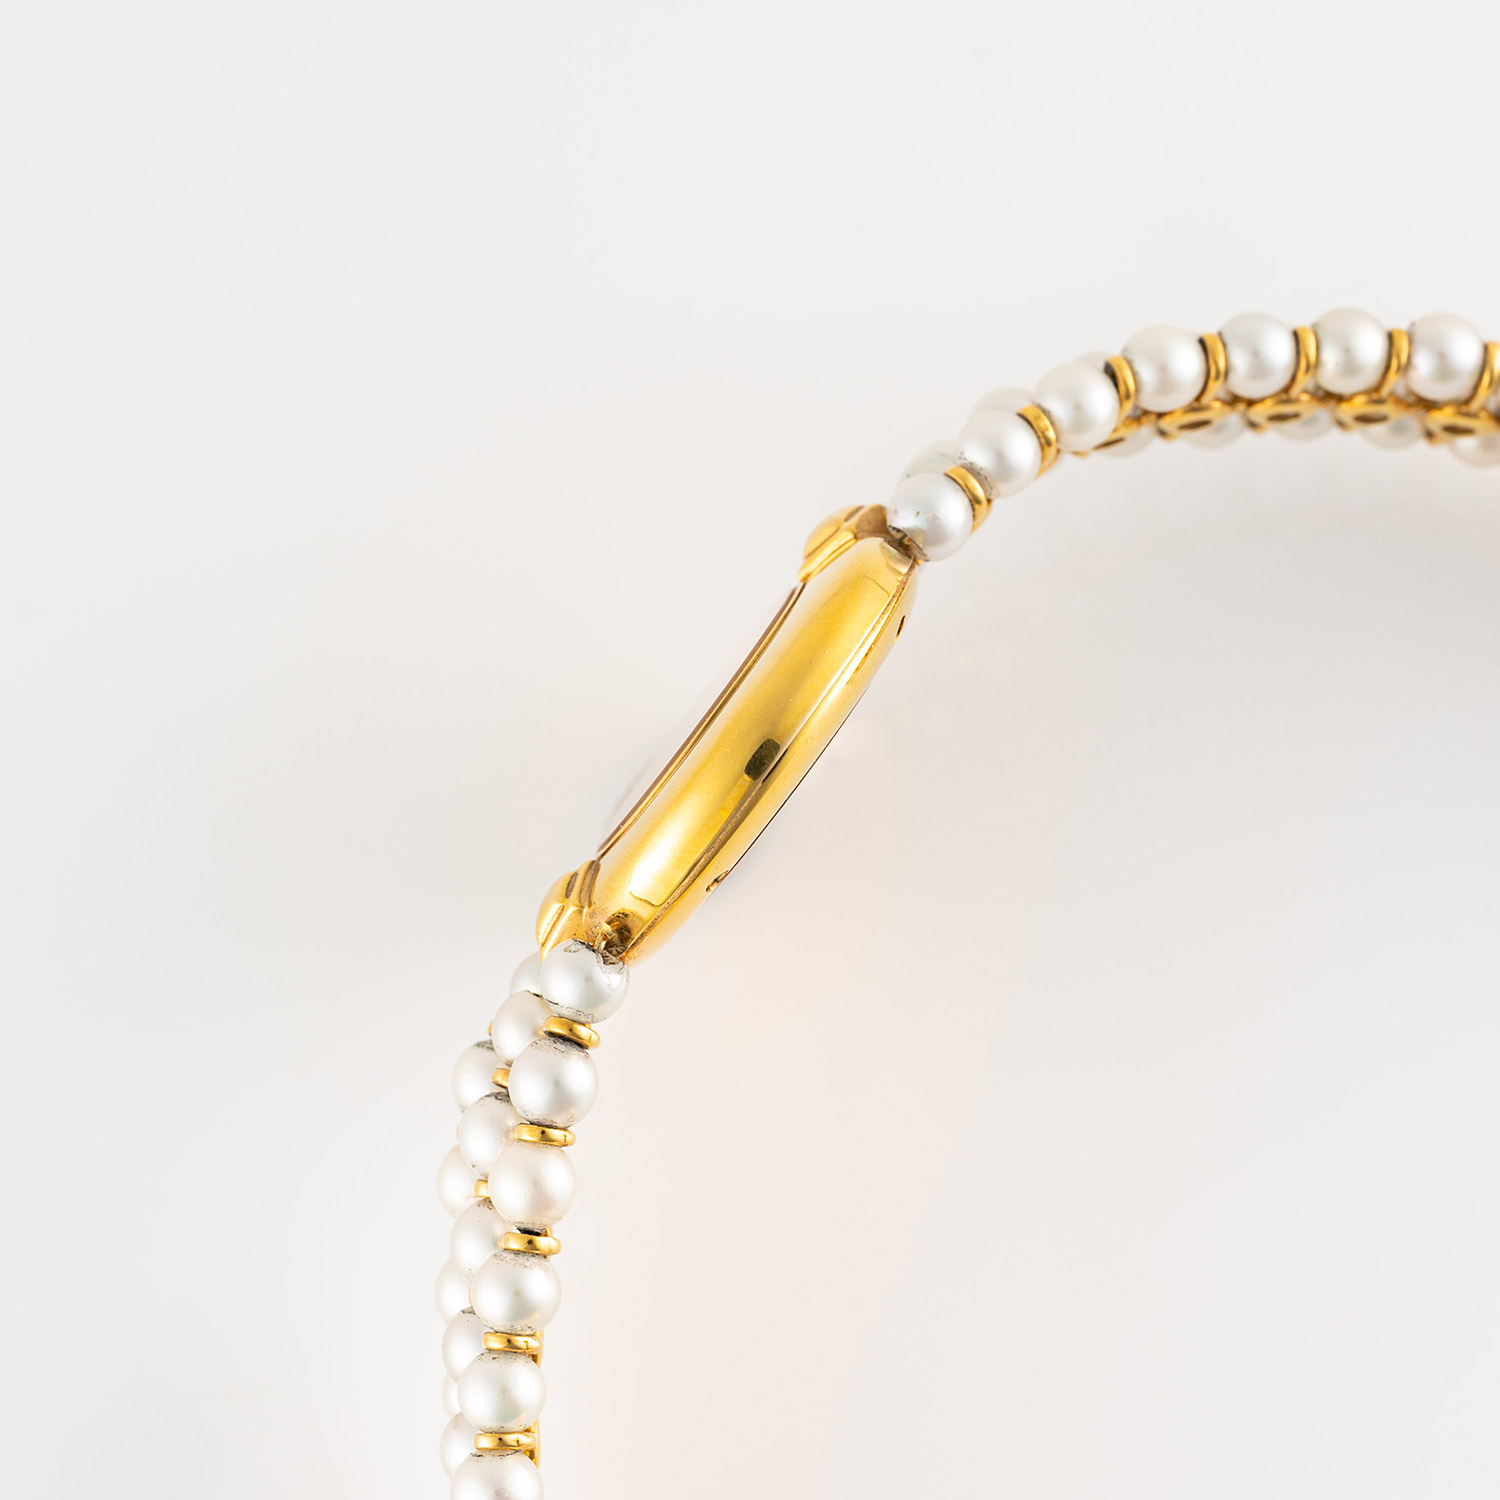 A LADIES 18K SOLID GOLD & PEARL CARTIER COLISEE BRACELET WATCH CIRCA 1990s, REF. 1989 1 Movement: - Image 9 of 9